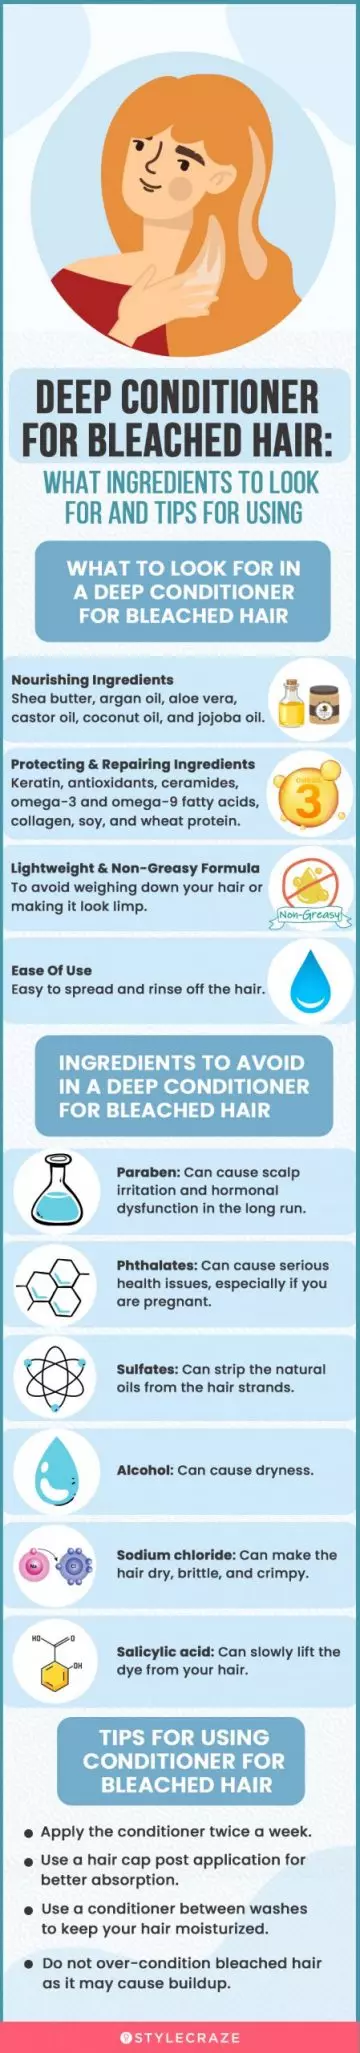 Deep Conditioner For Bleached Hair